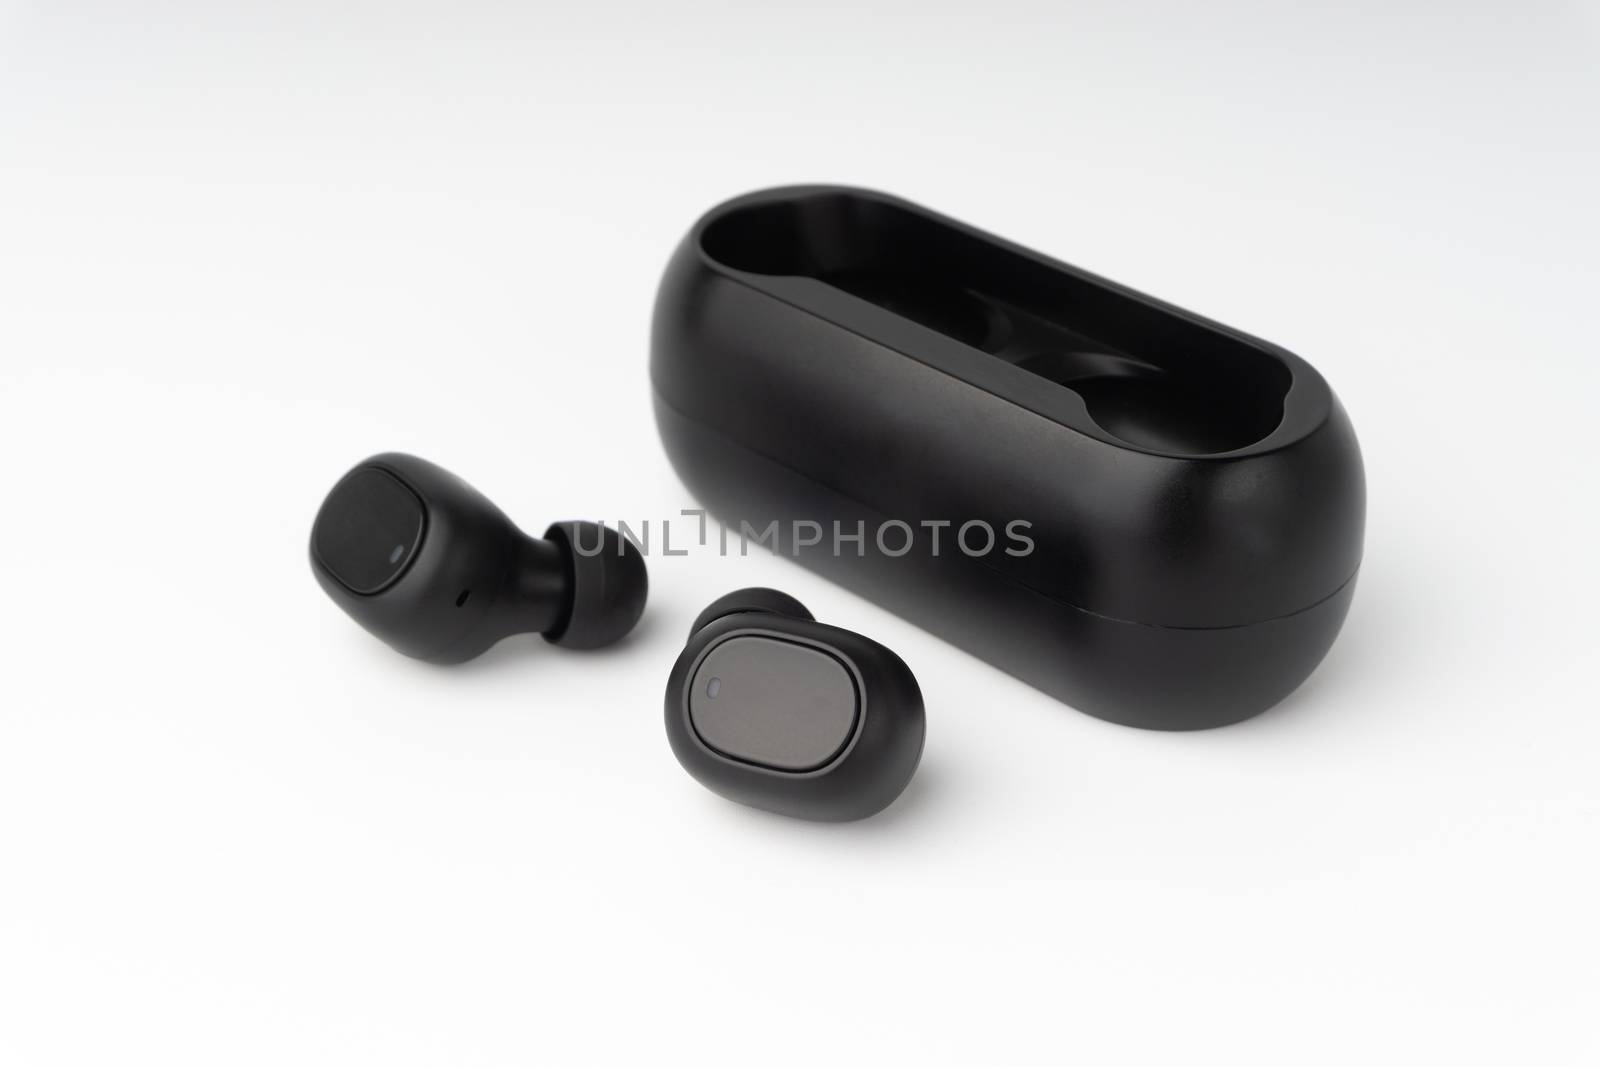 Wireless earbuds or earphones on white background by silverwings